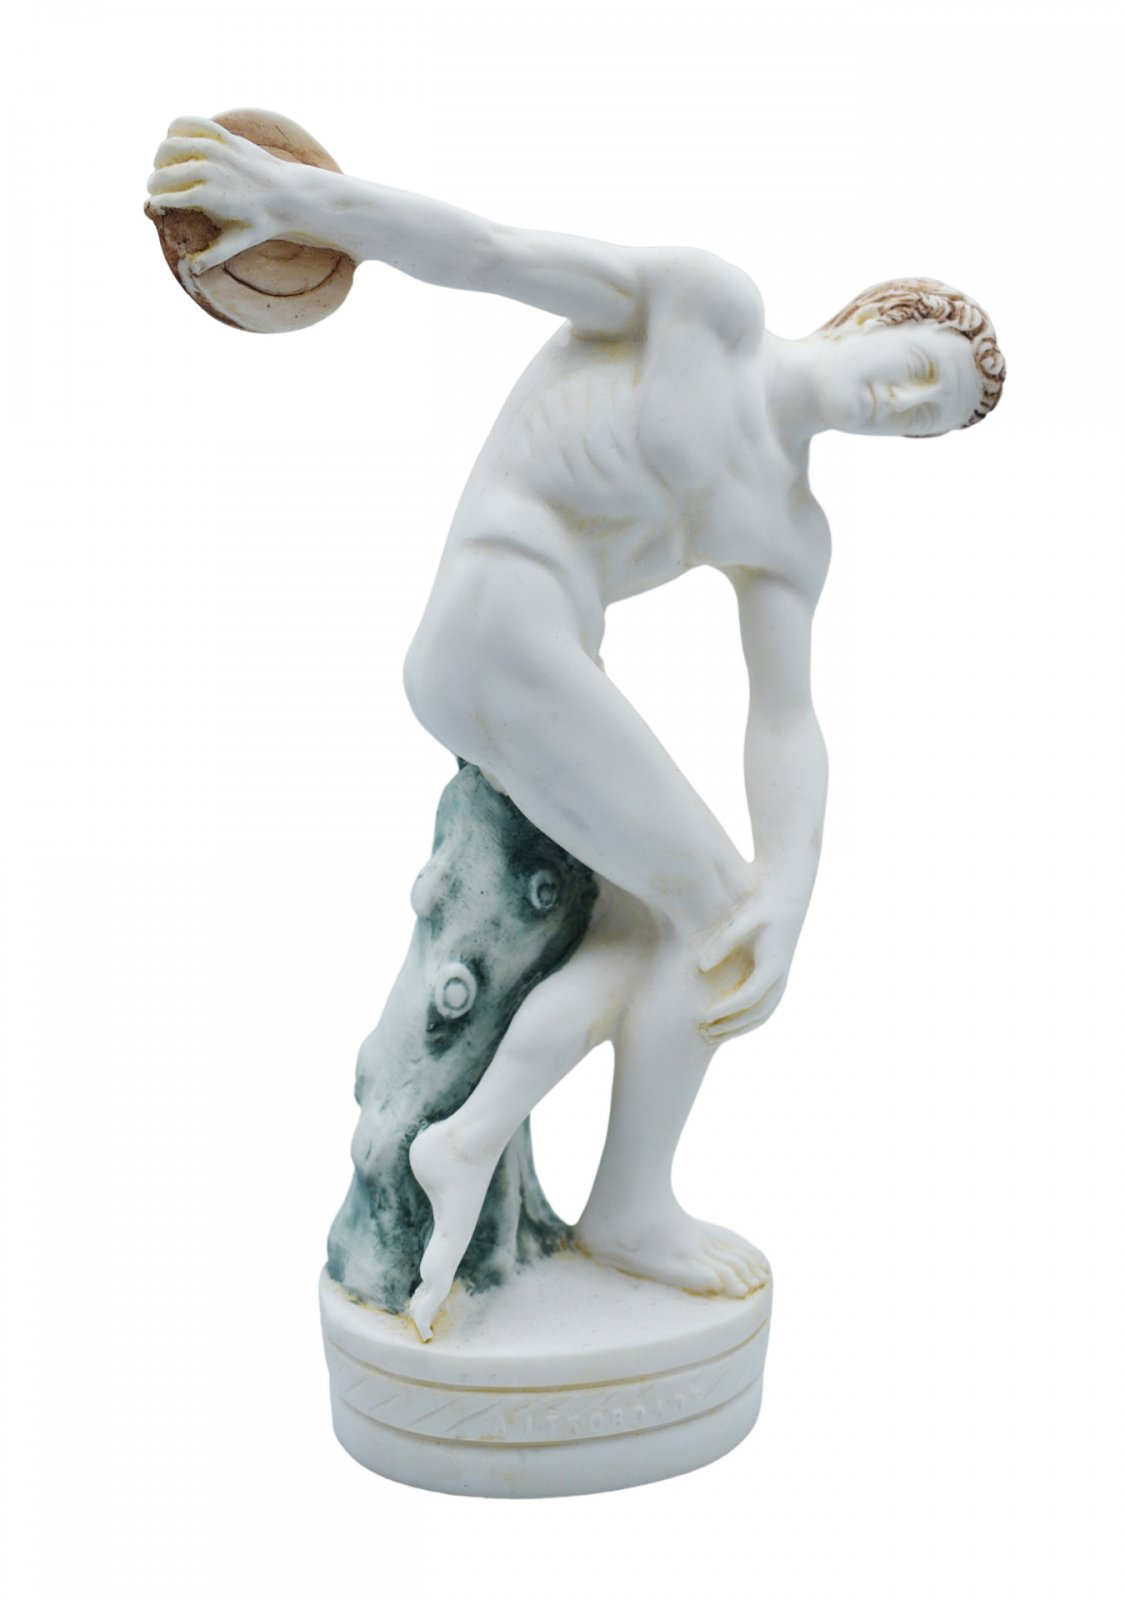 Discus thrower, Discobolus of Myron, greek alabaster statue with color